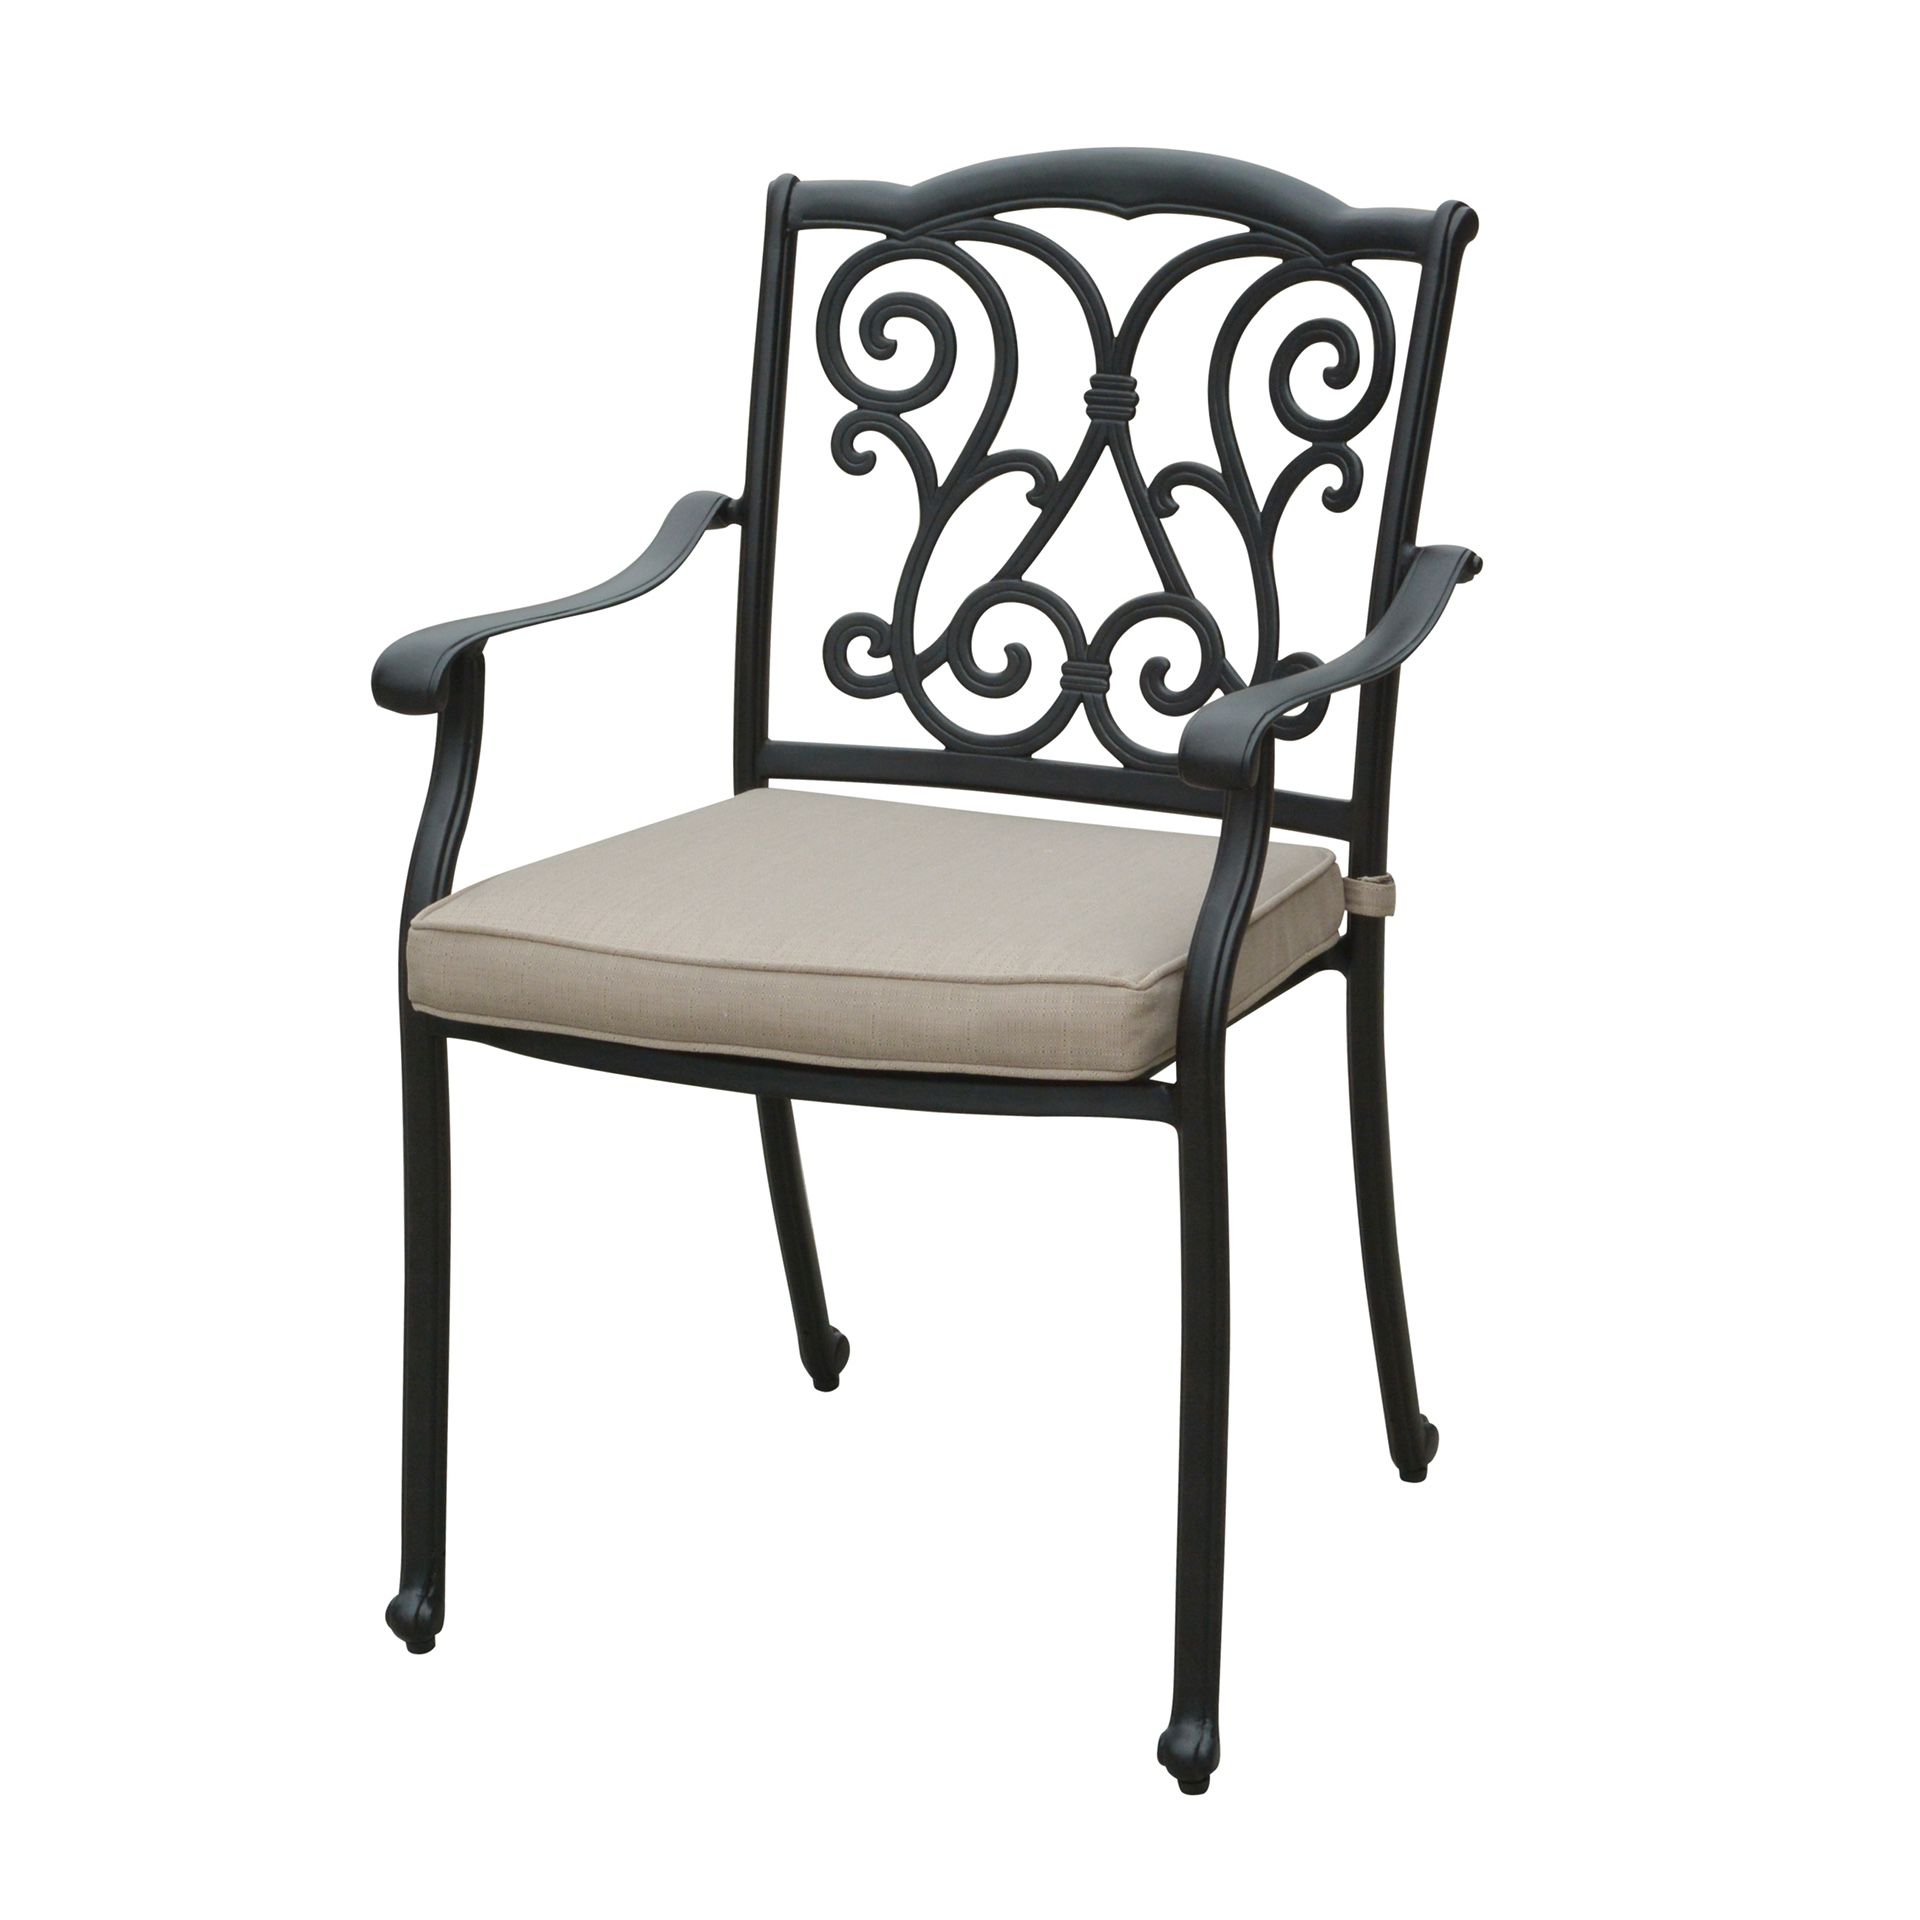 Brand new cast aluminum patio dining chair X4. Warehouse clearance sale!